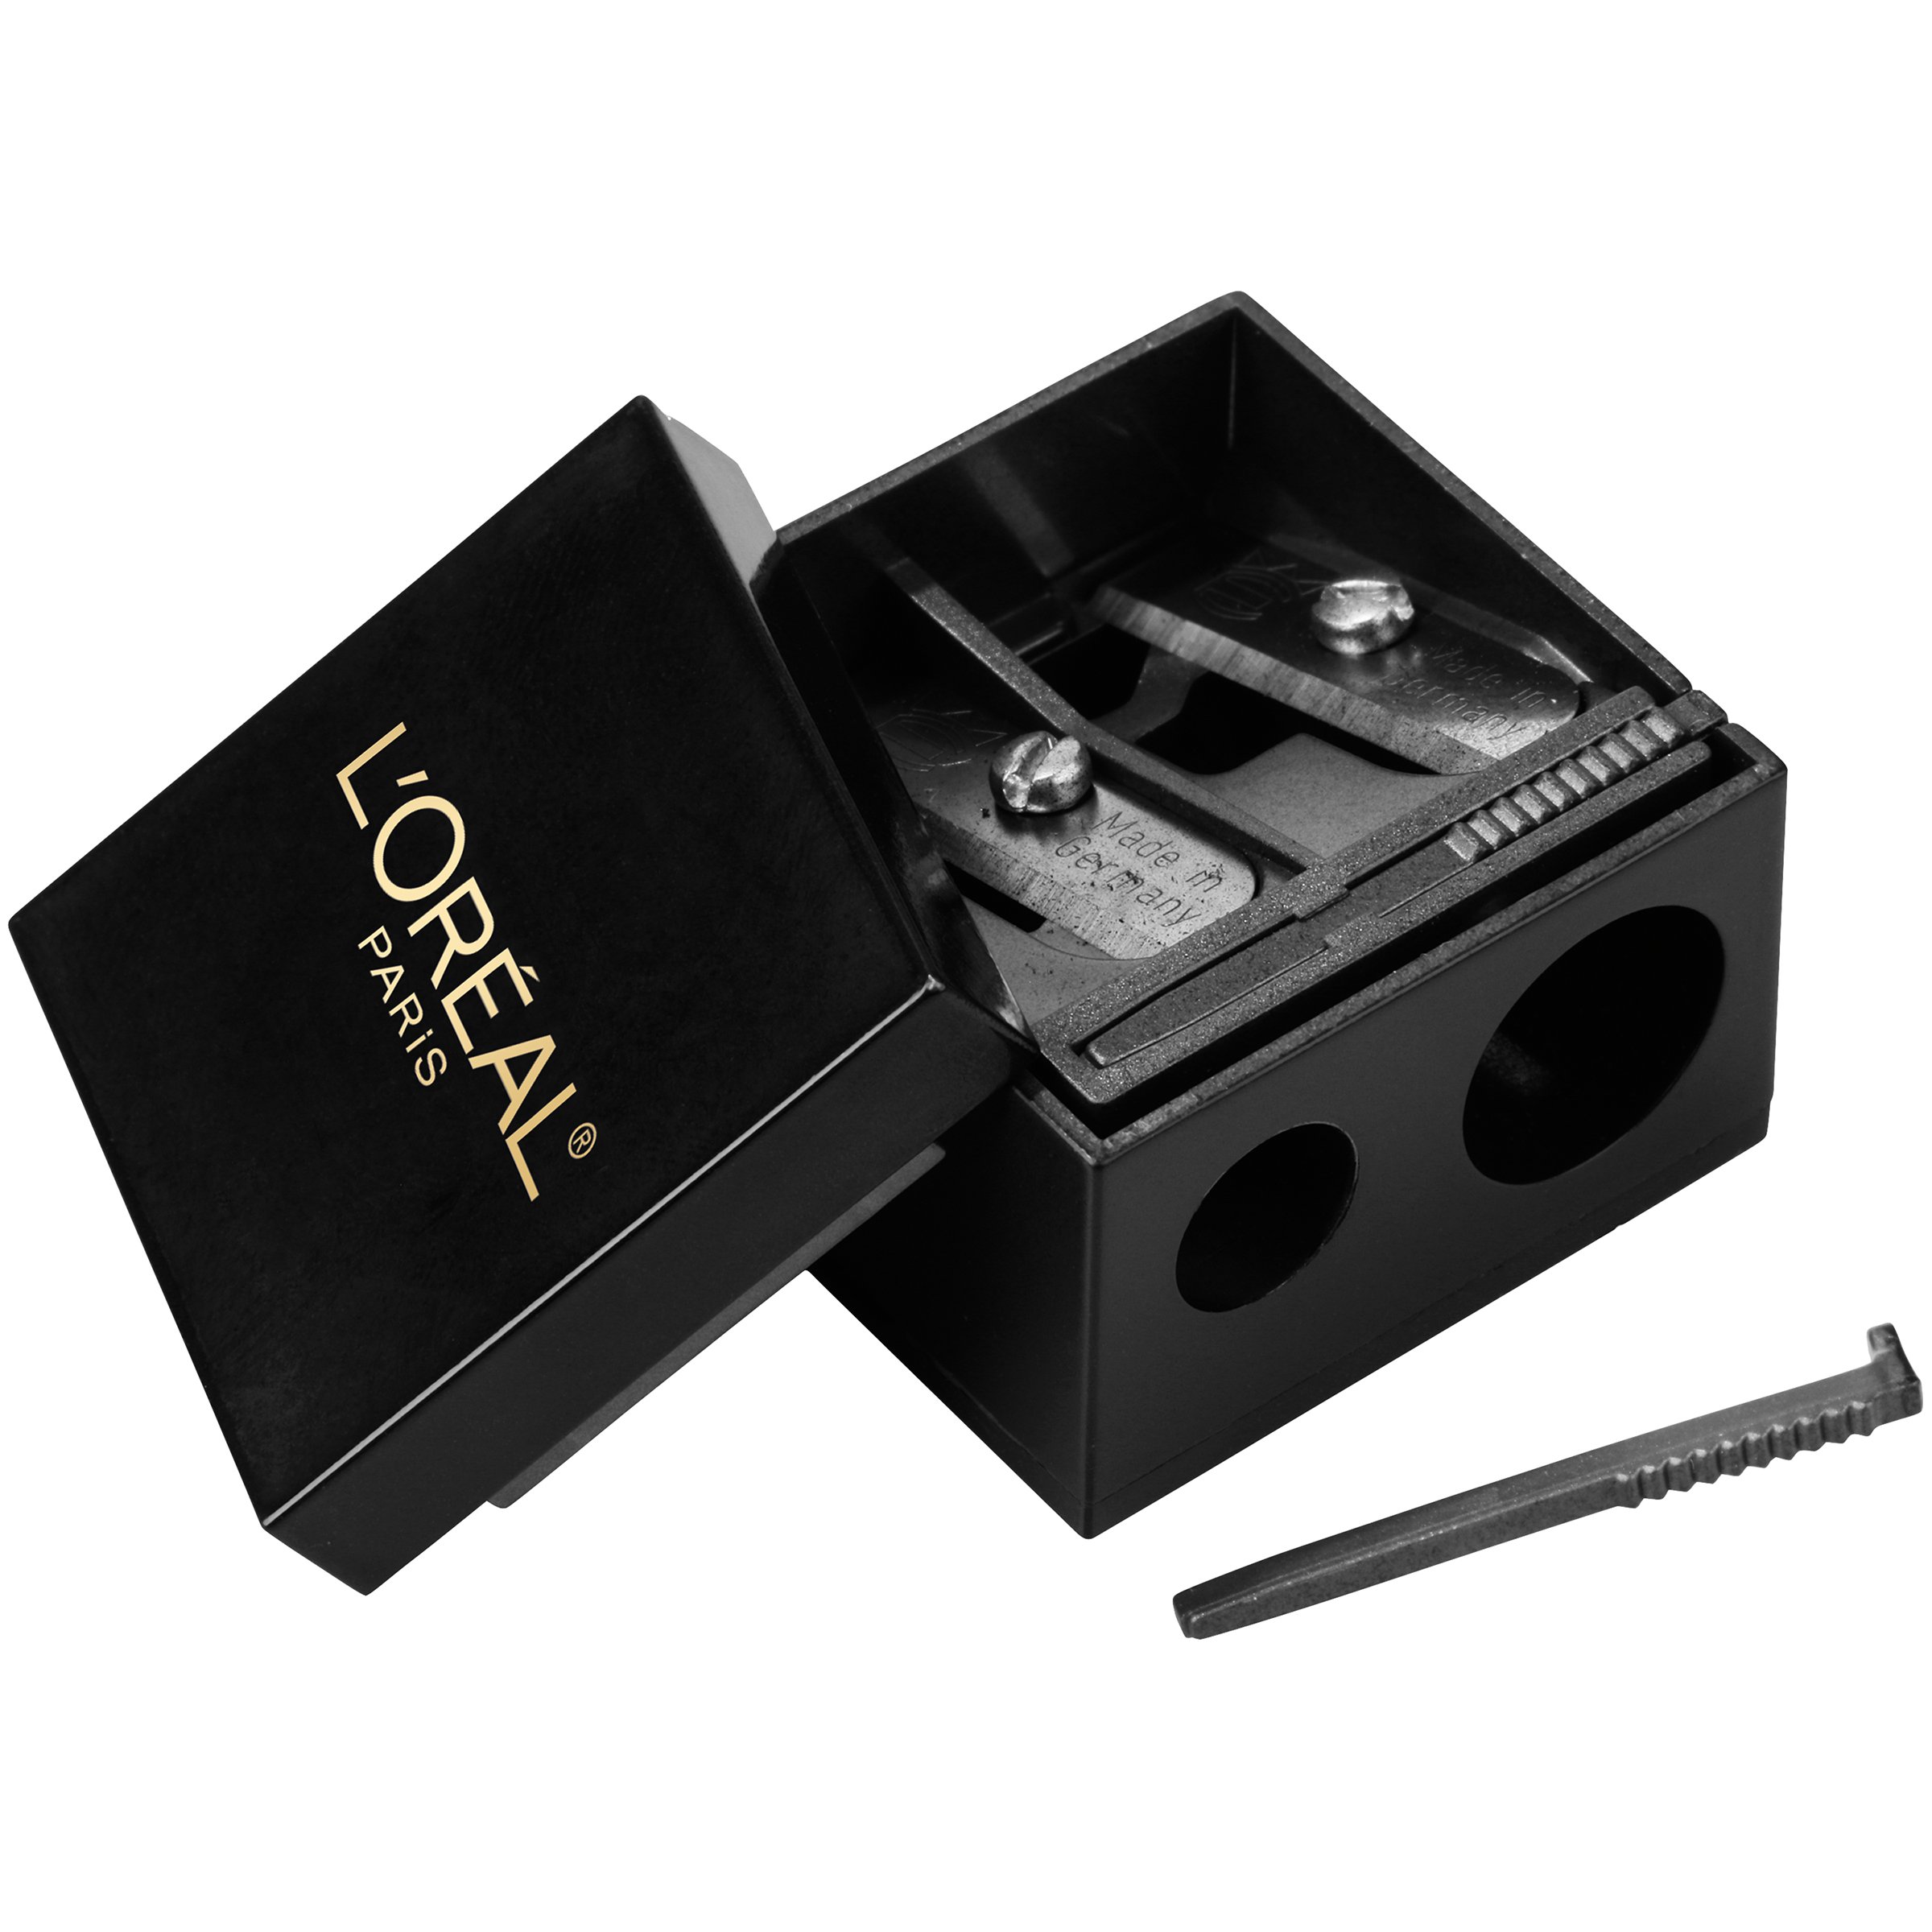 Get the best deals on CHANEL Black Makeup Pencil Sharpeners when